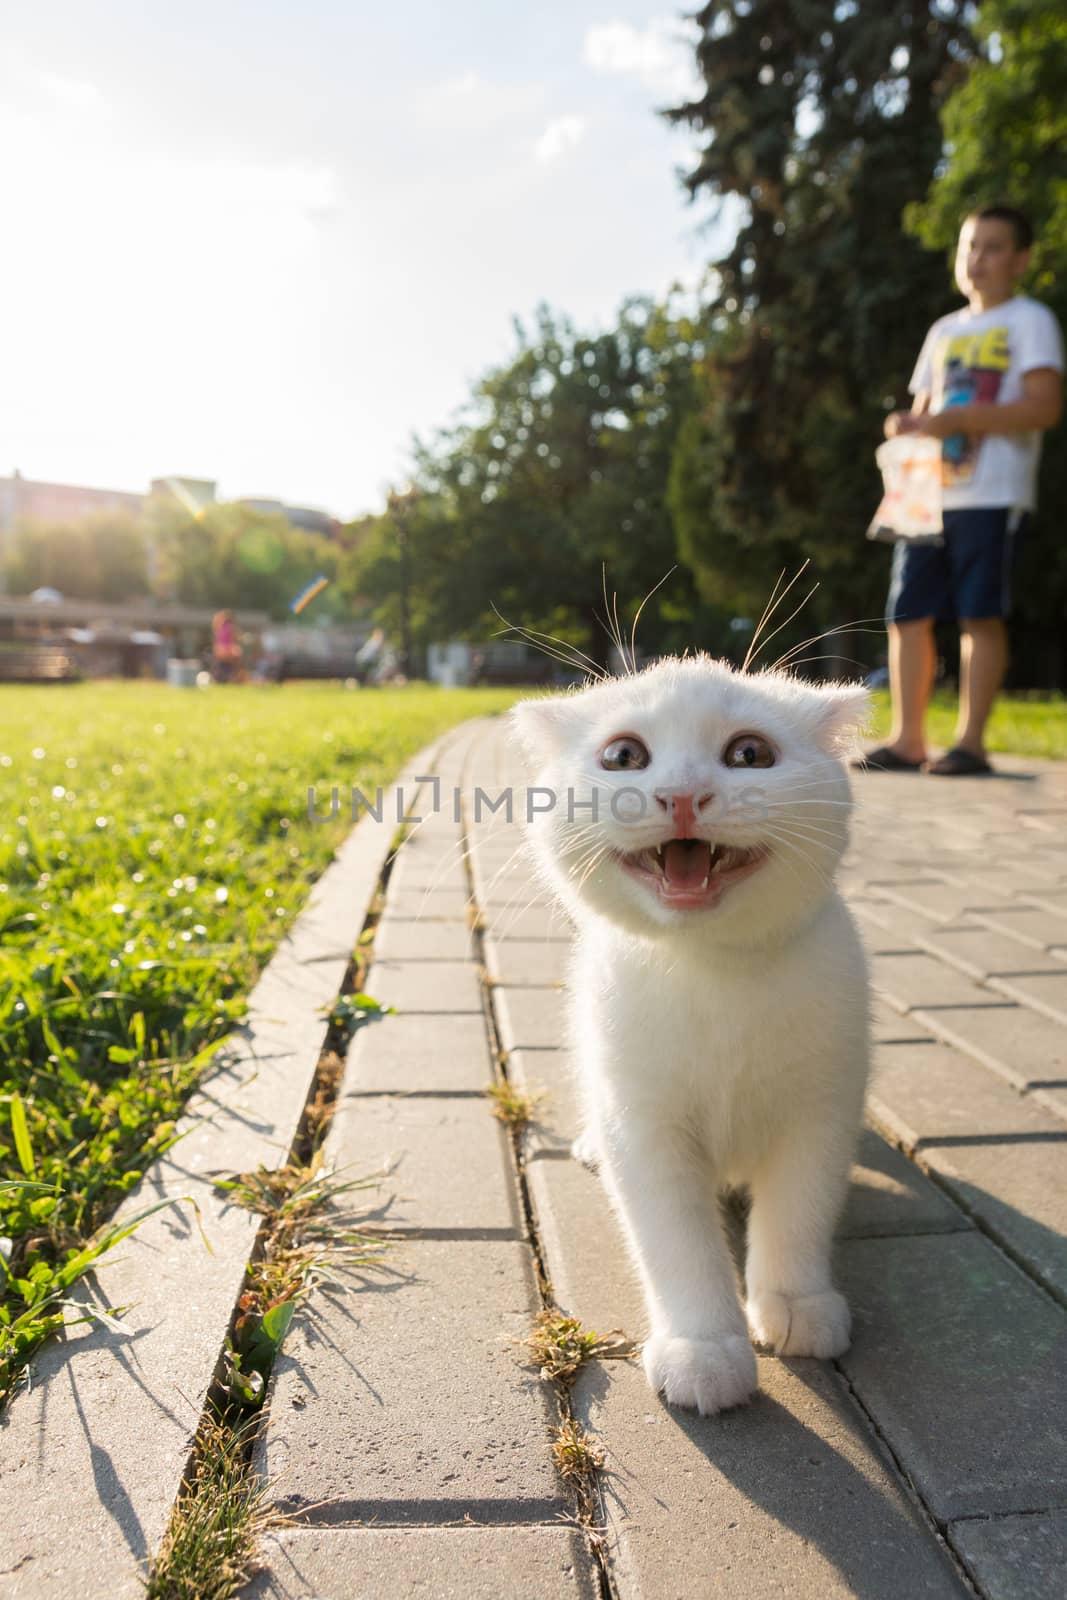 Kitten walks in the Izmailovo Park. He walks with a smile on the pavement.